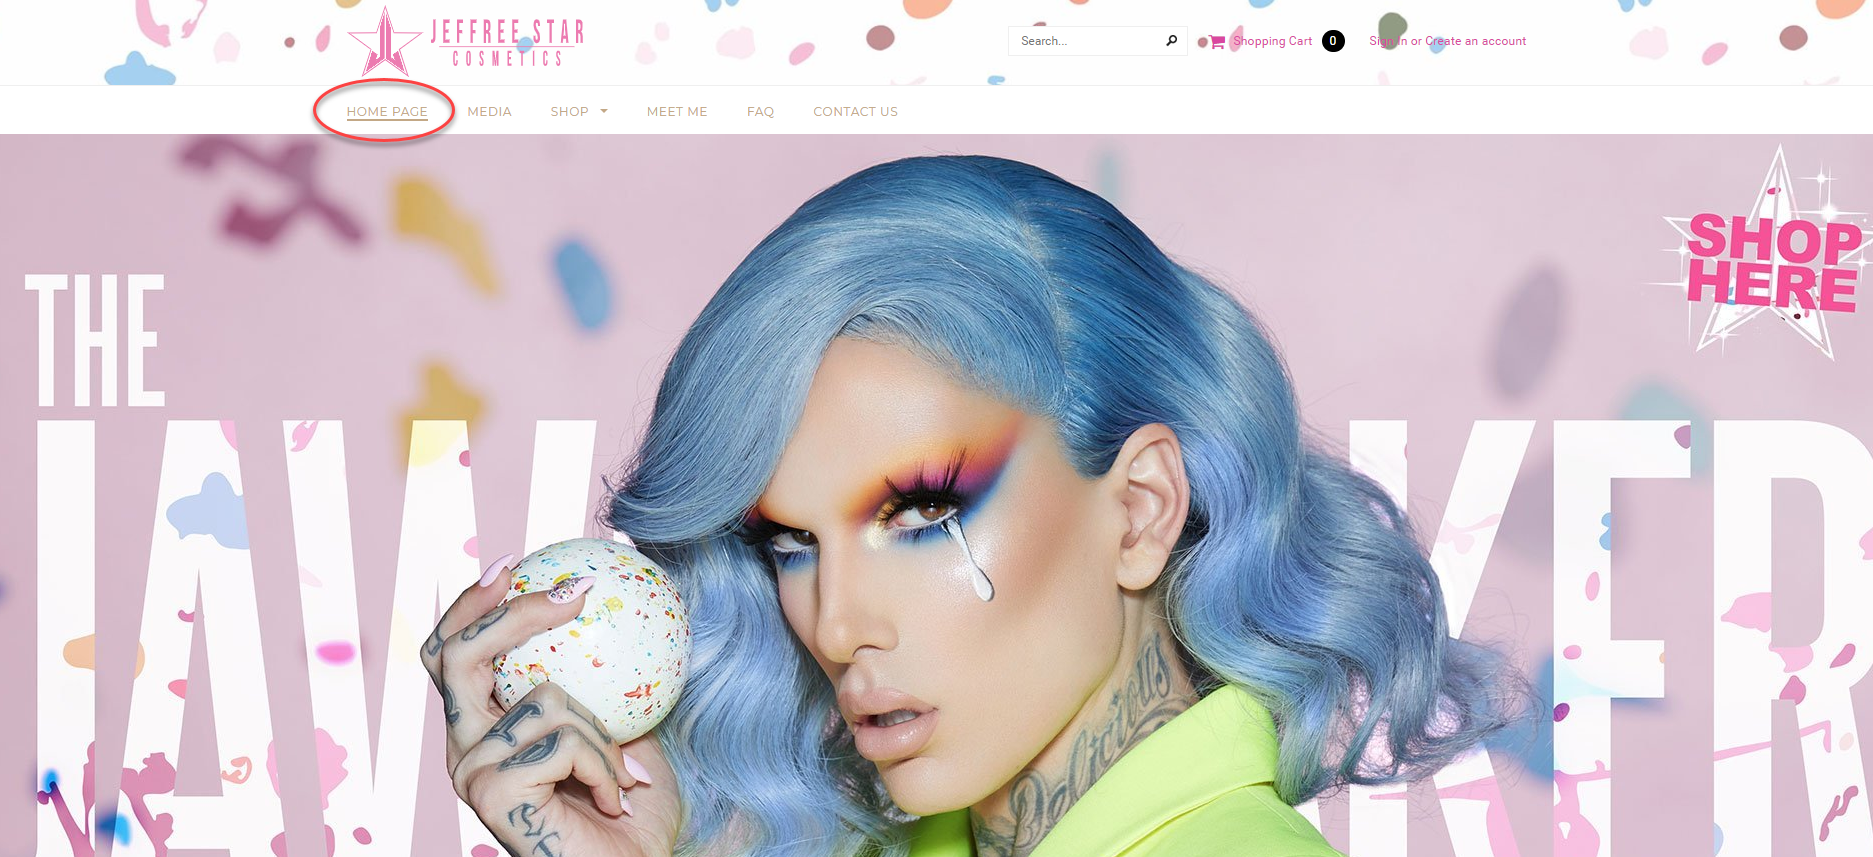 Example of an explicit home link on the Jeffree Star Cosmetics website